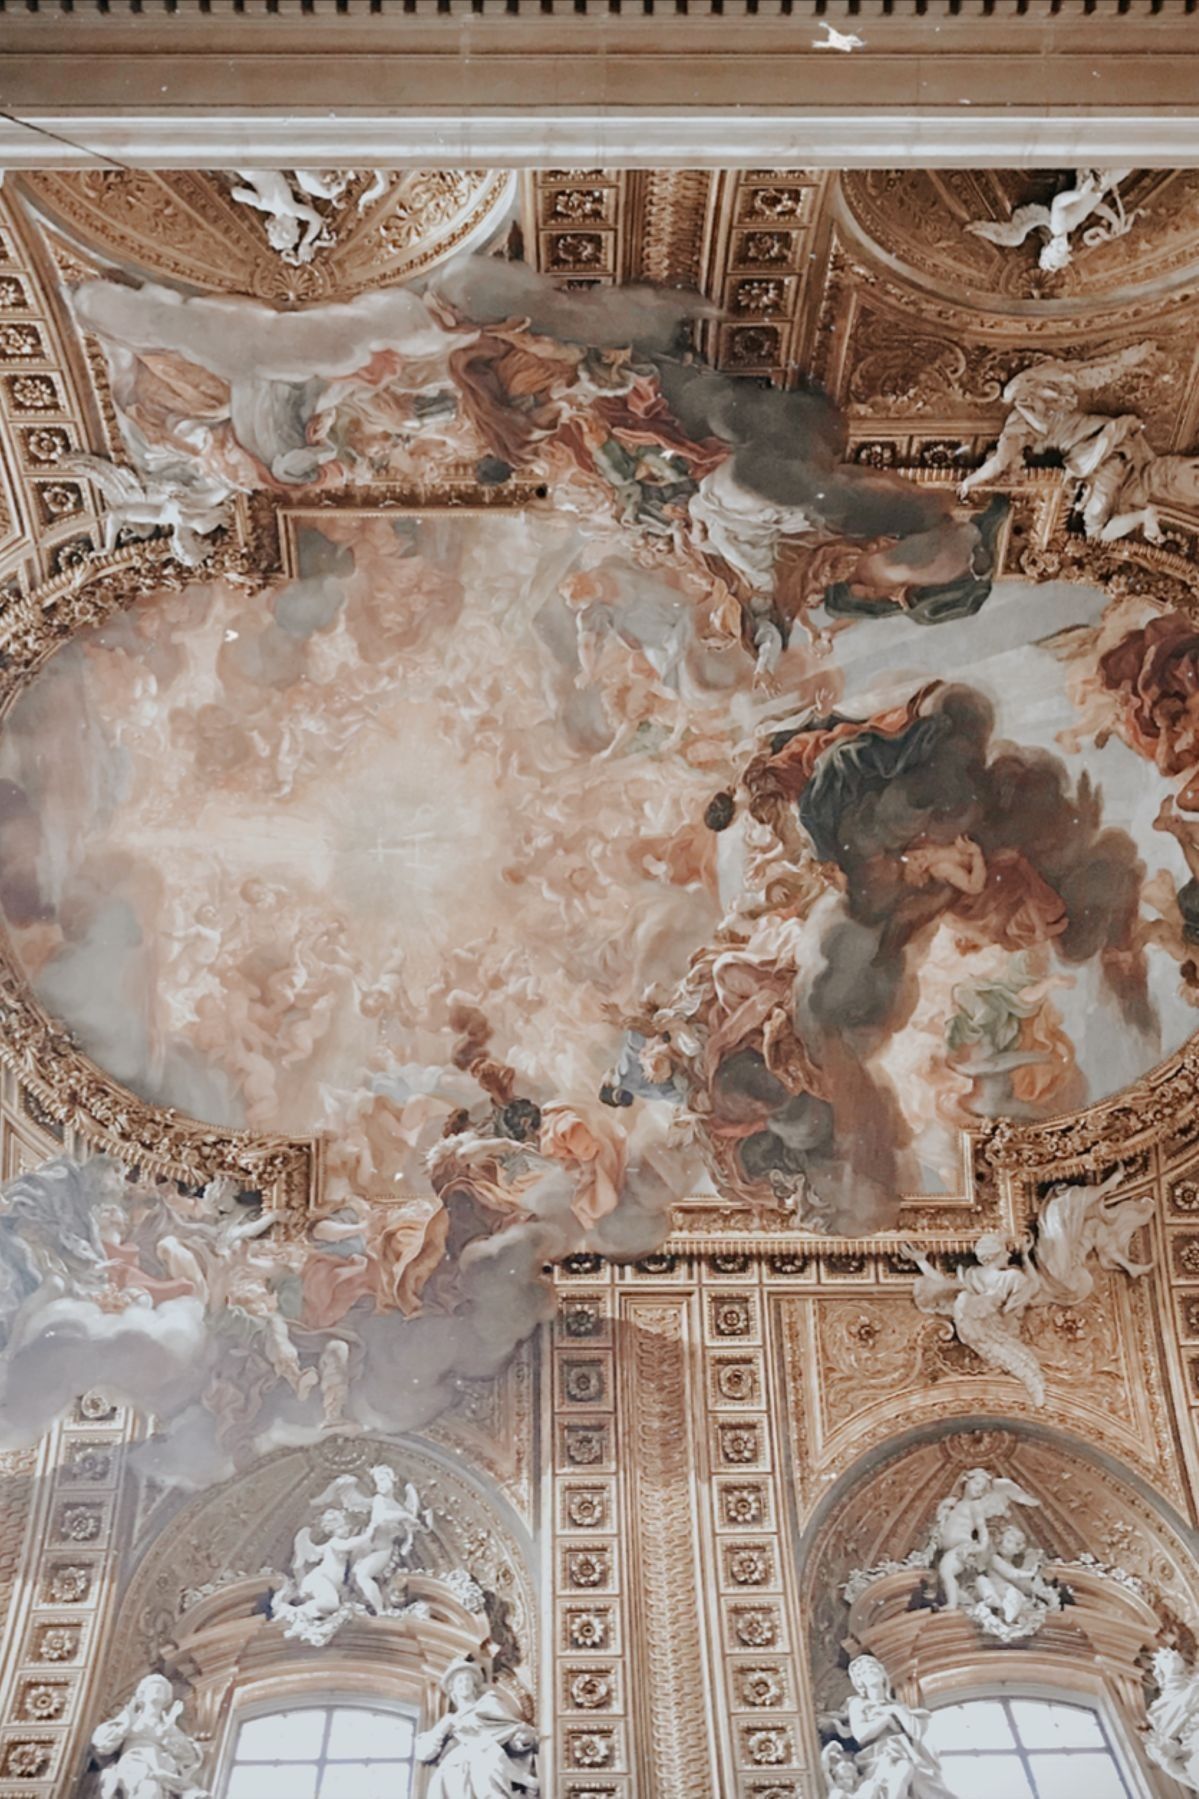 A painting of the last judgment is painted on the ceiling of a church. - Royalcore